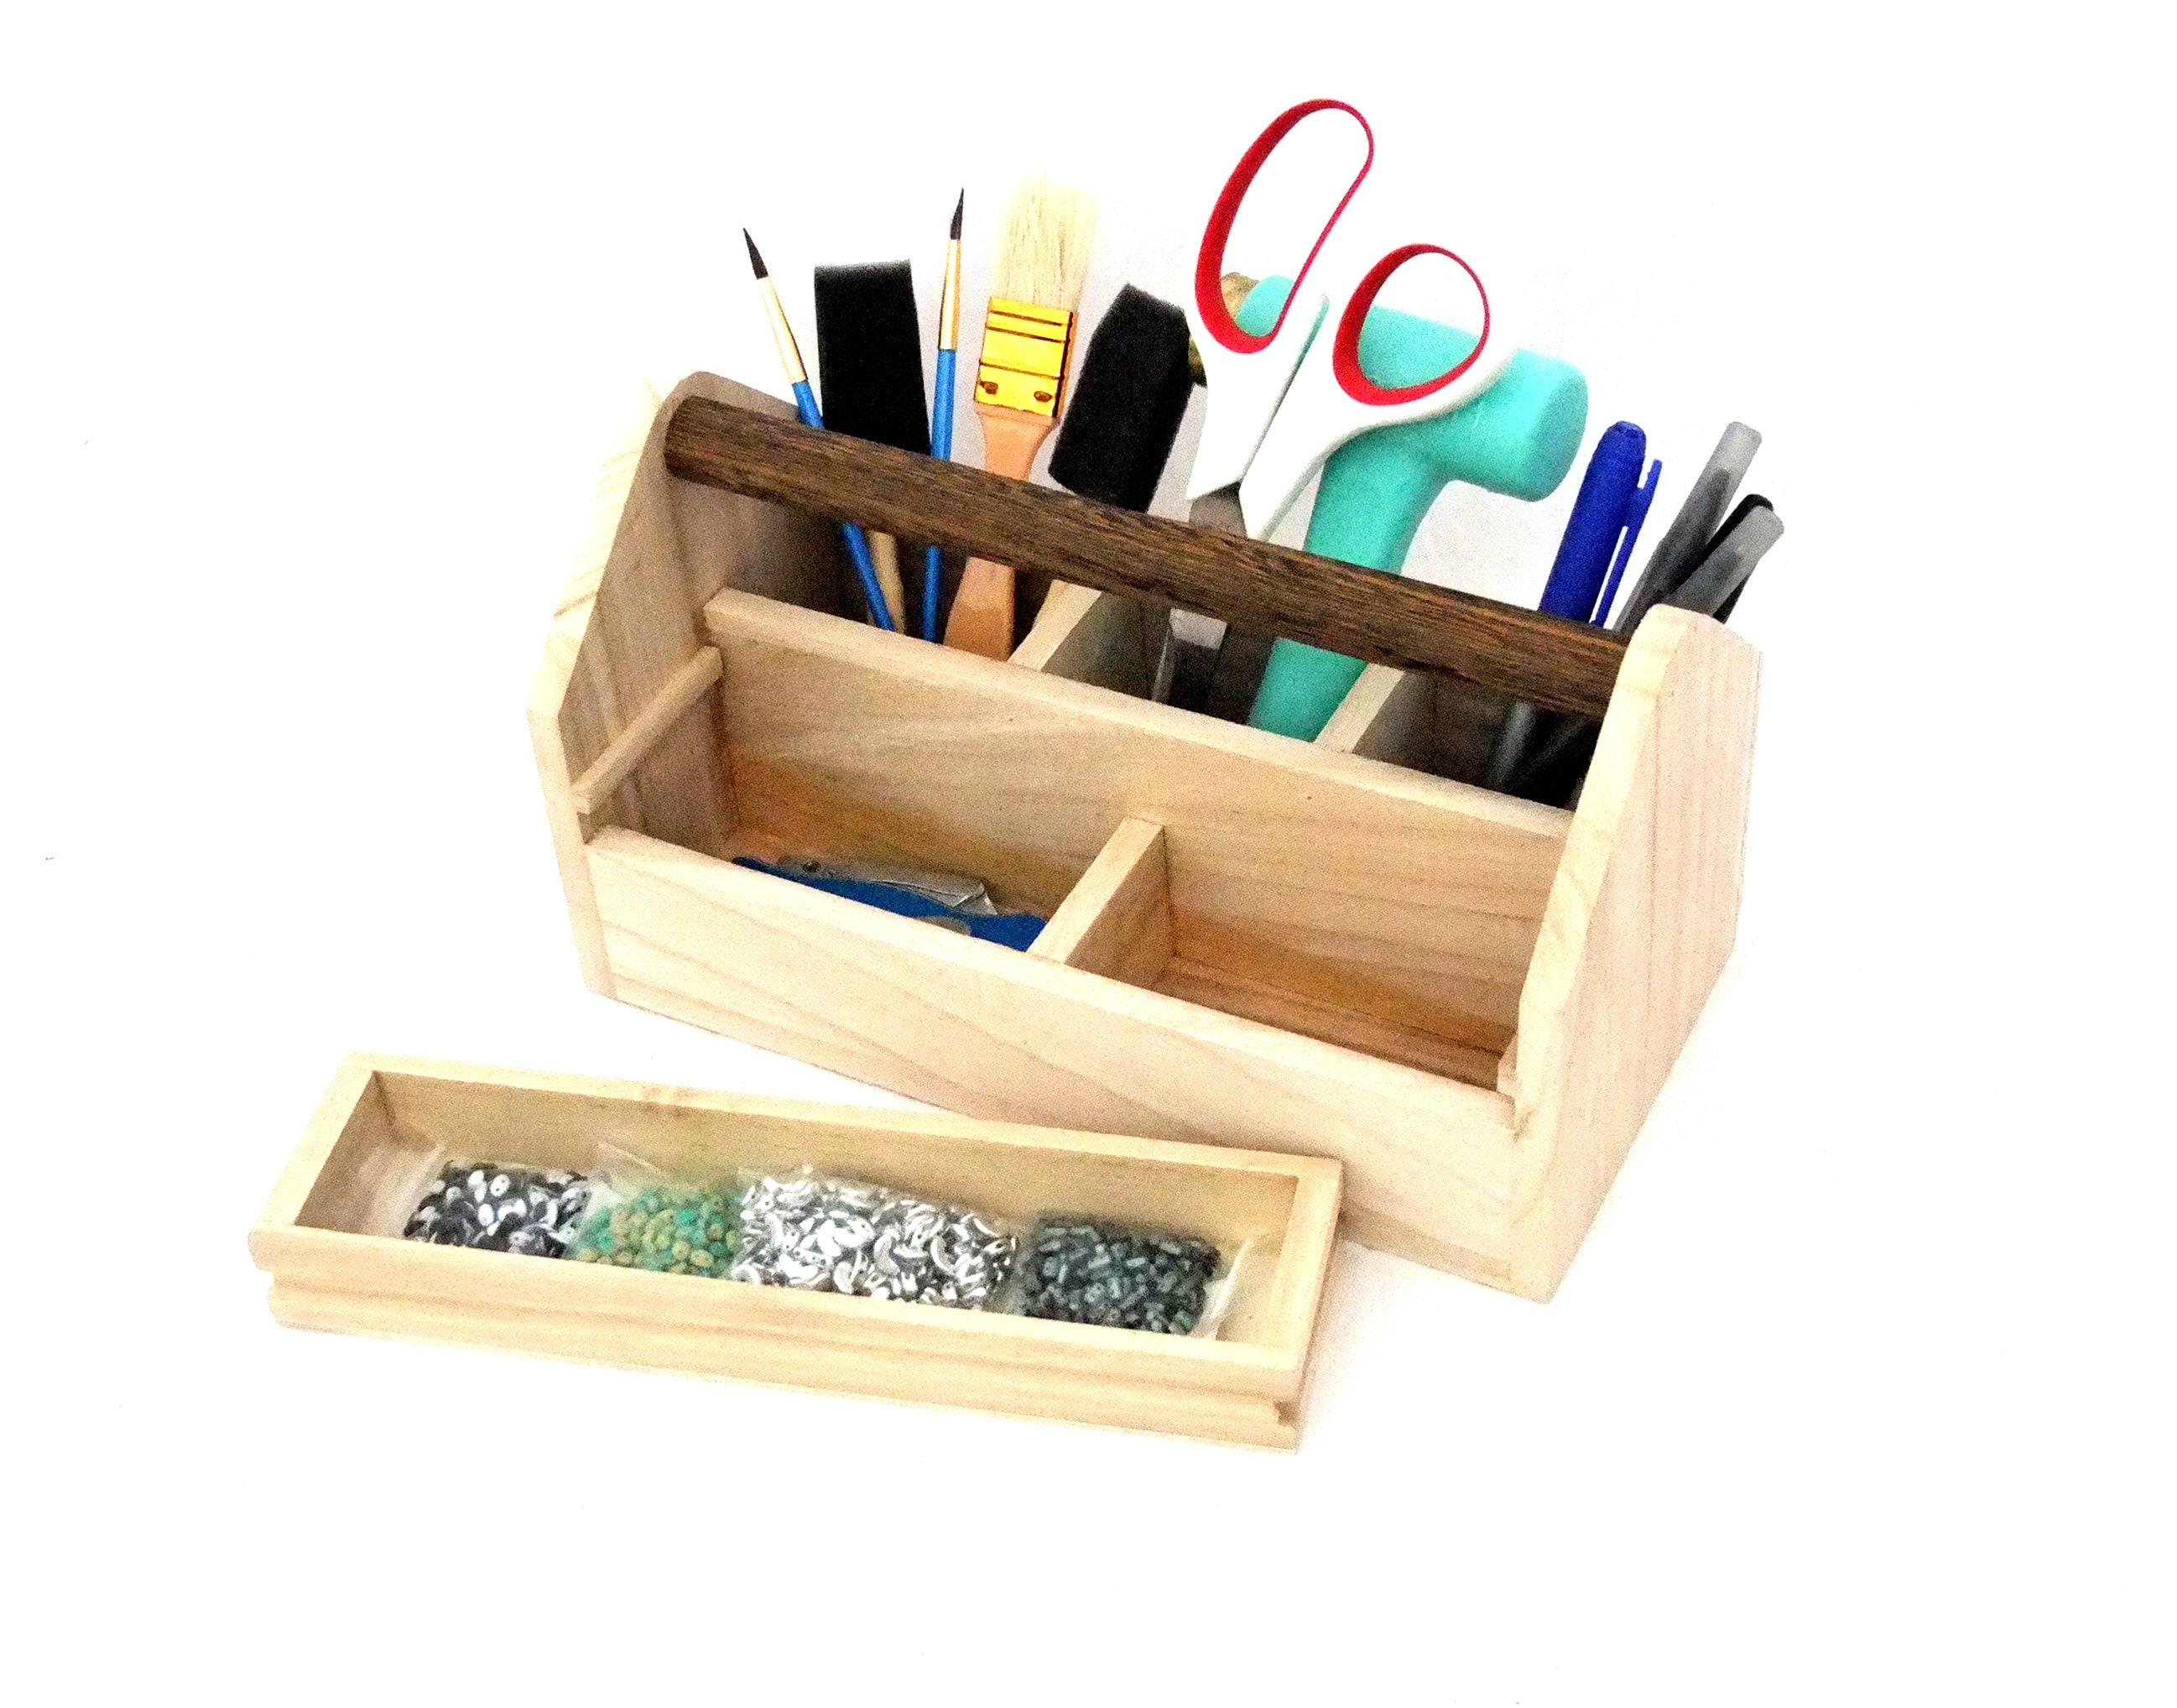 Wooden Craft Tool Box Caddy with Handle - Brilliant Promos - Be Brilliant!